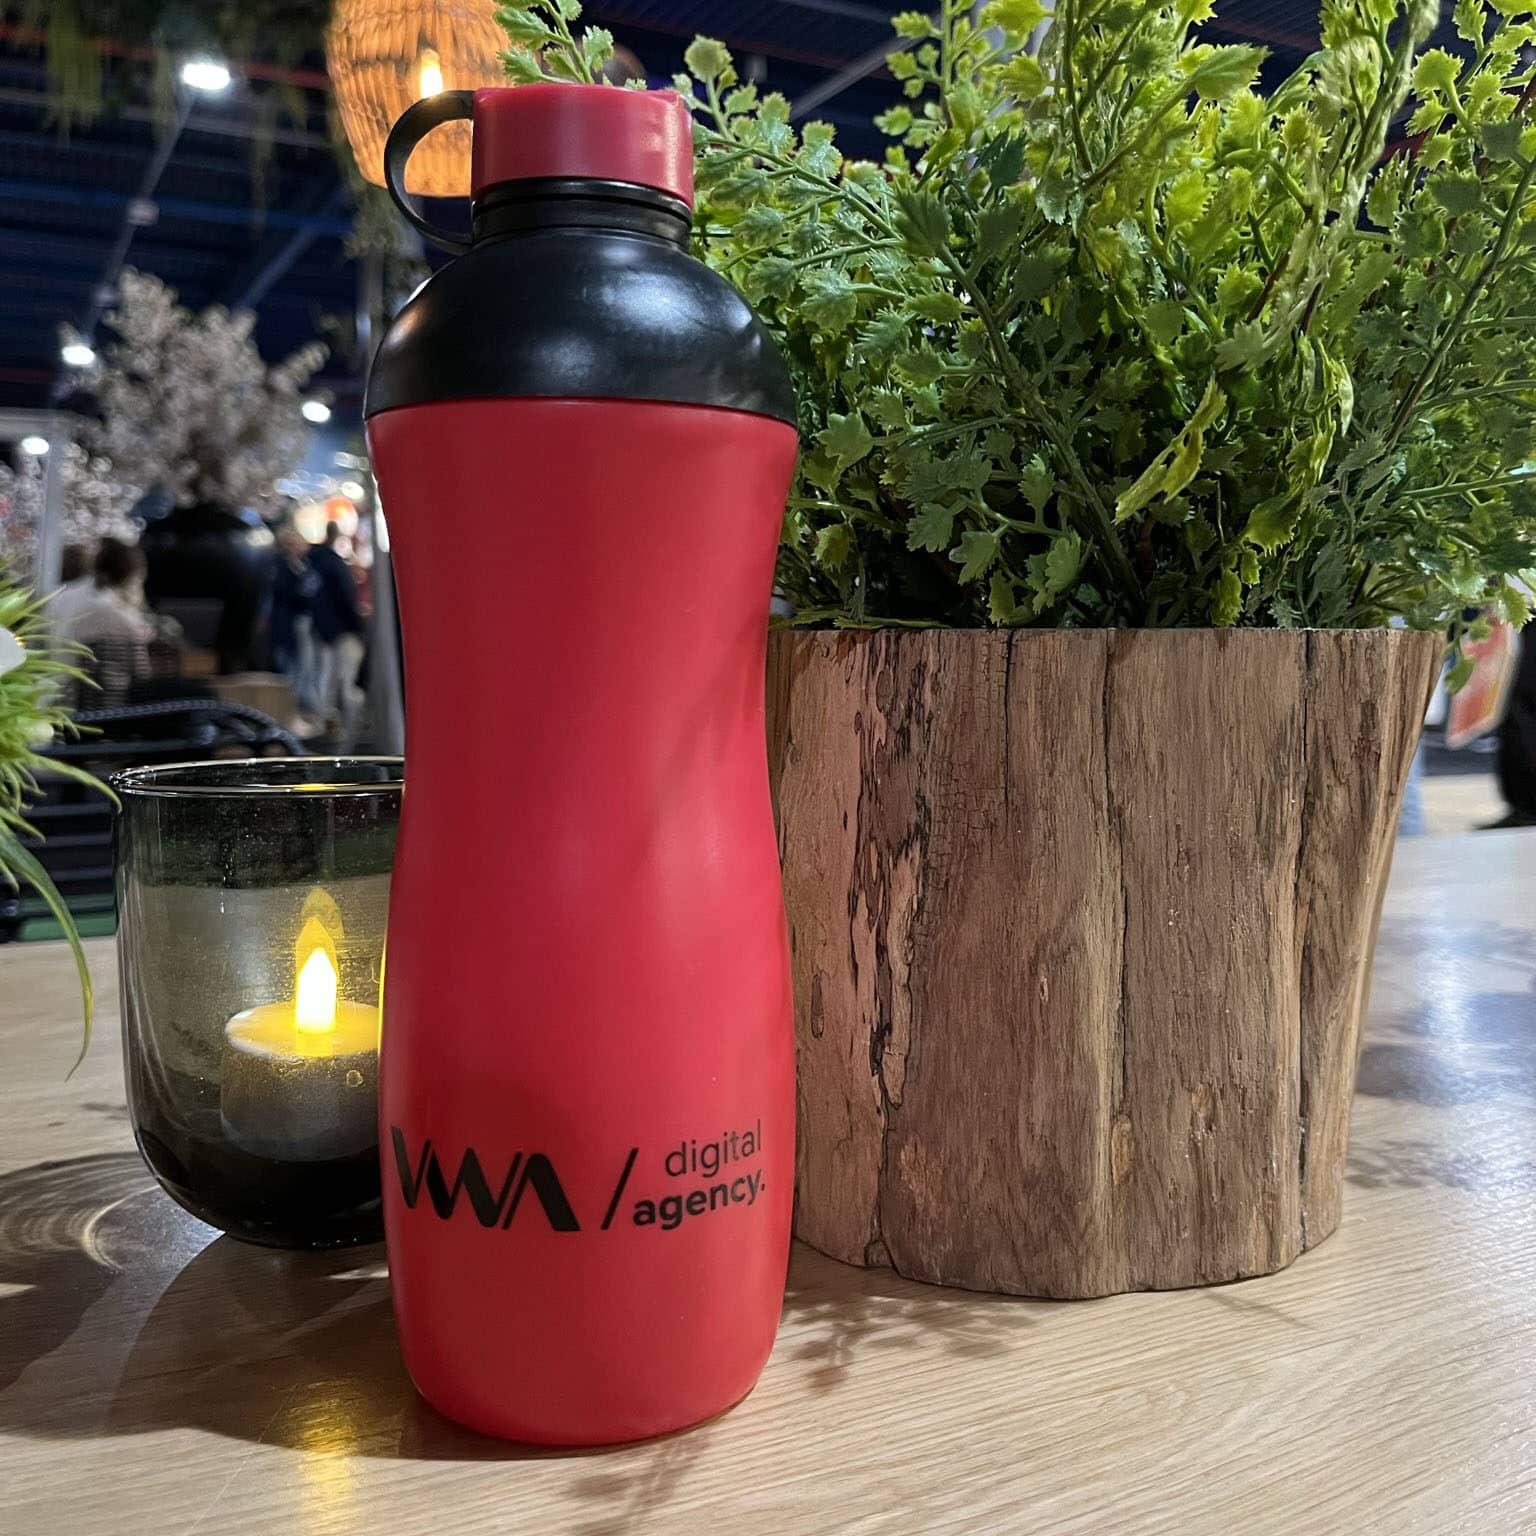 Laser engraving on a red Oasus water bottle